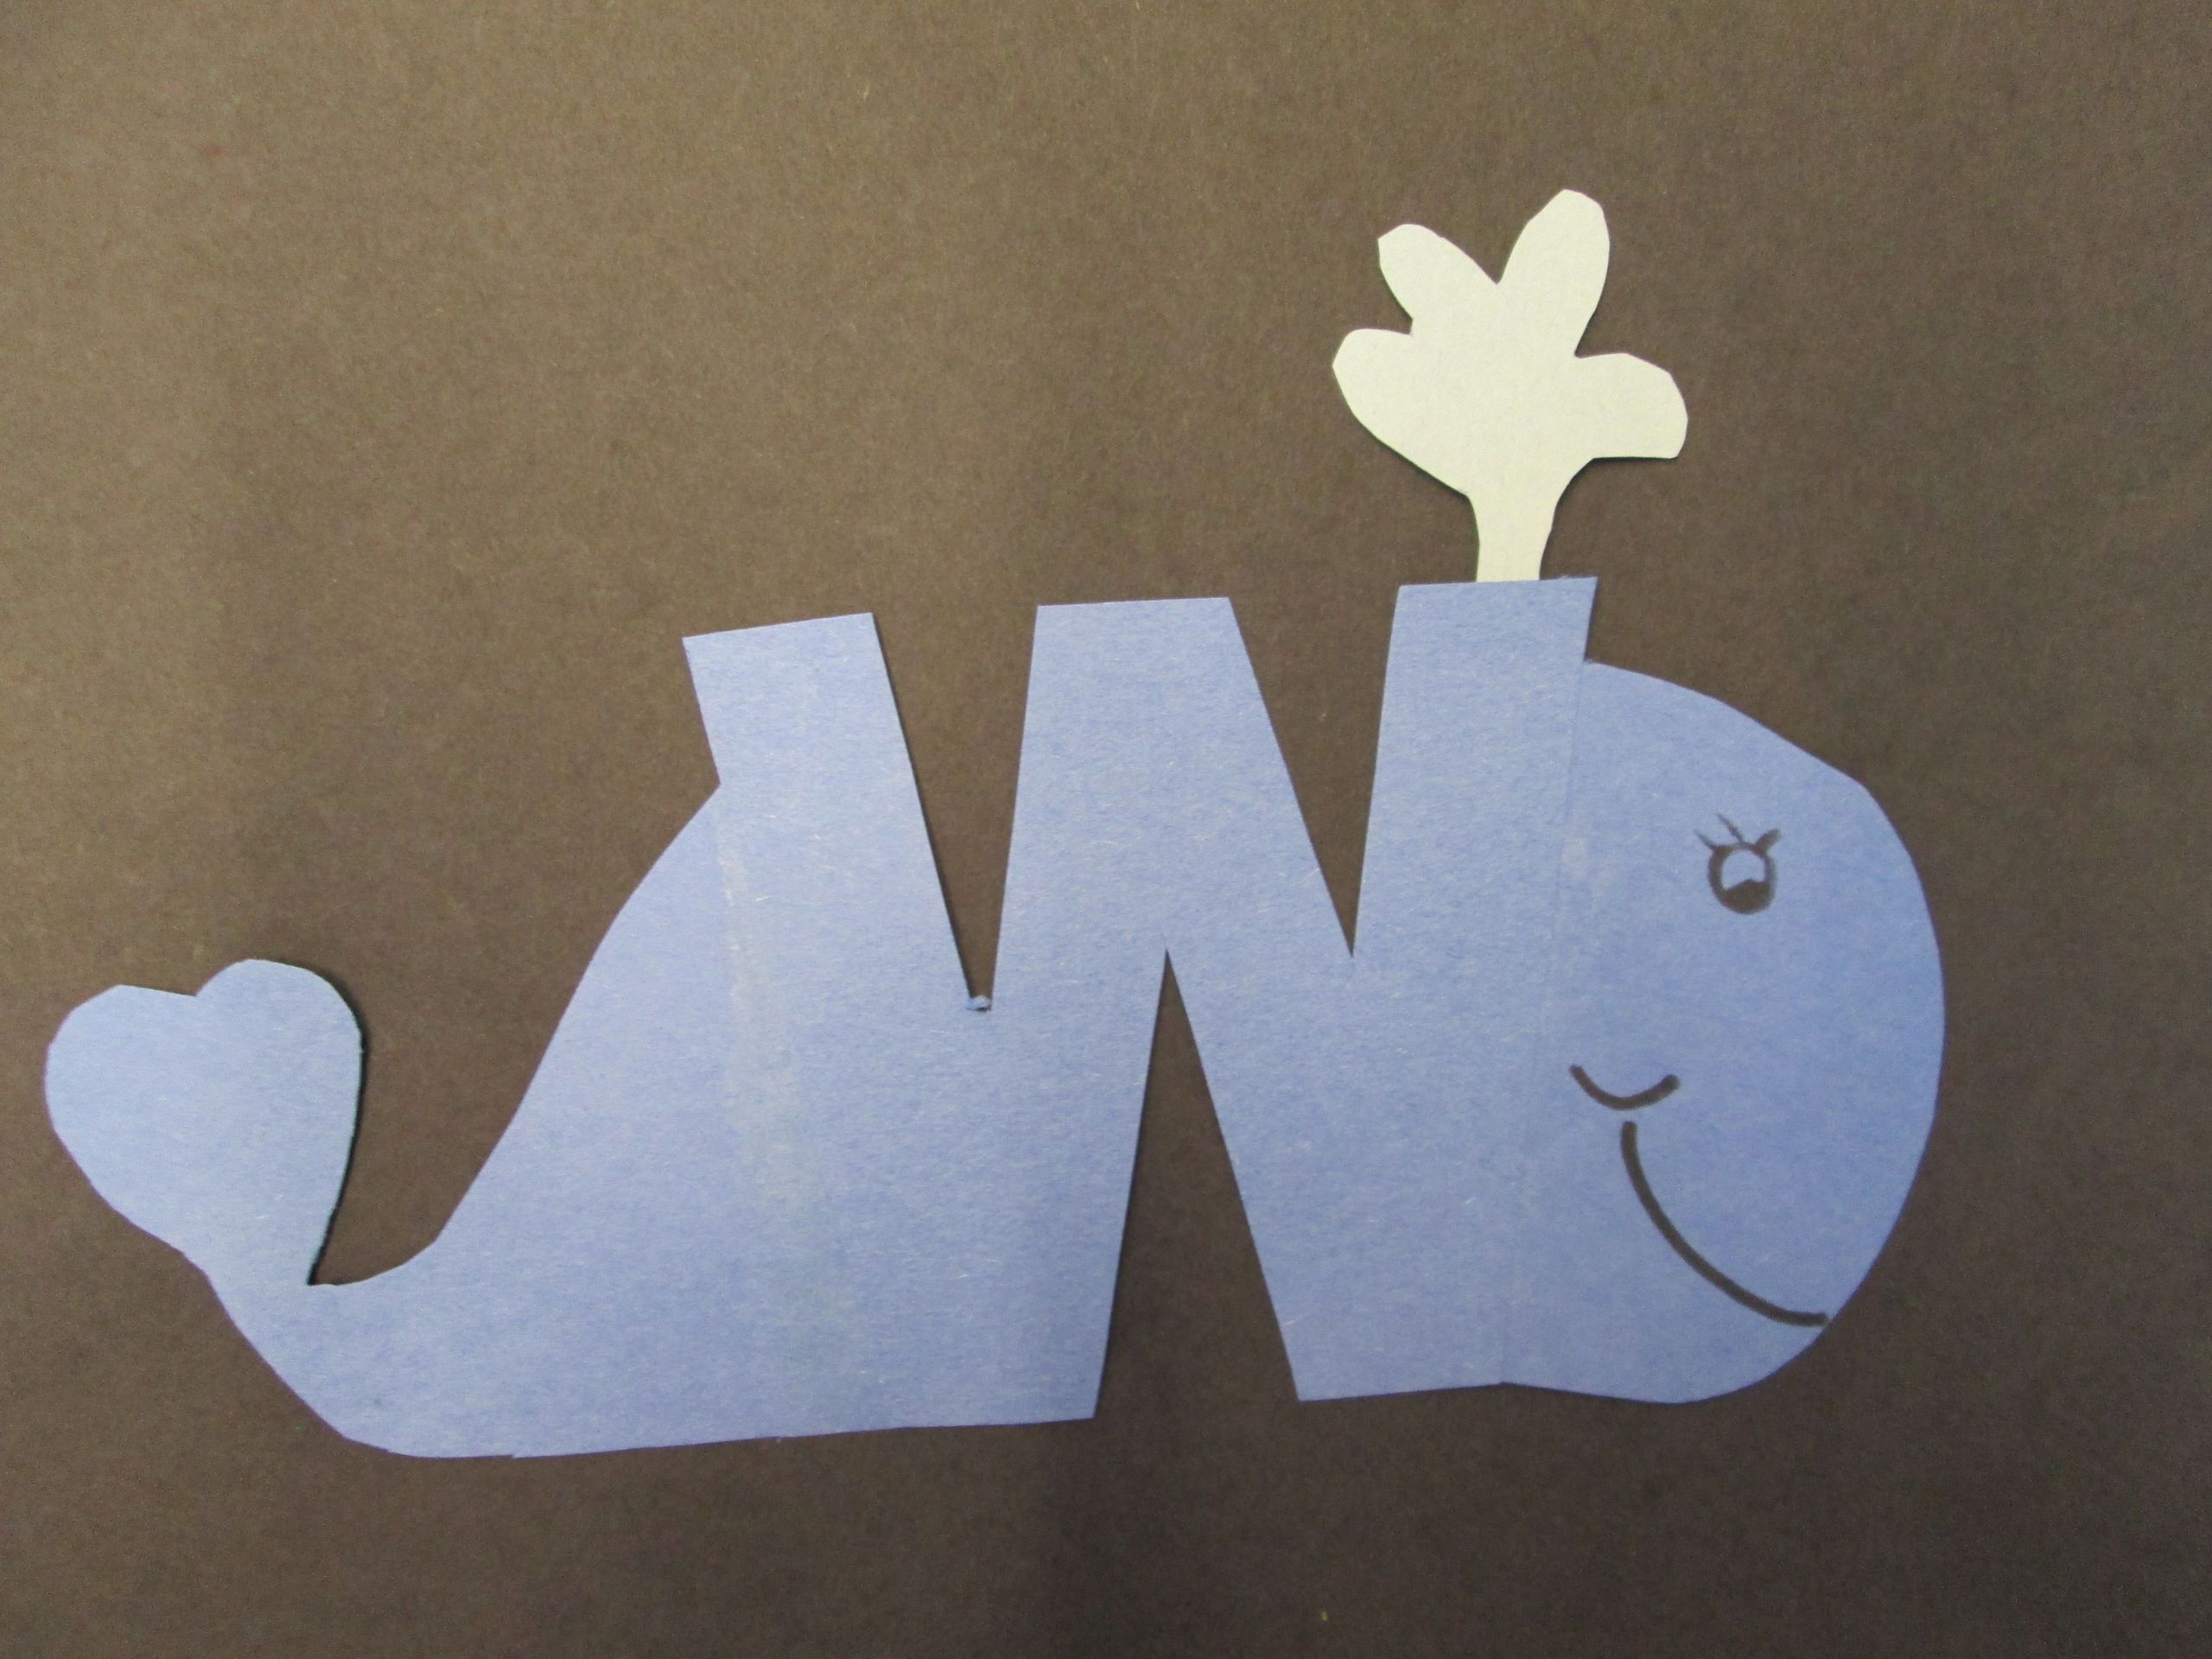 W Crafts For Preschool
 Letter W craft Whale a library passive program to build